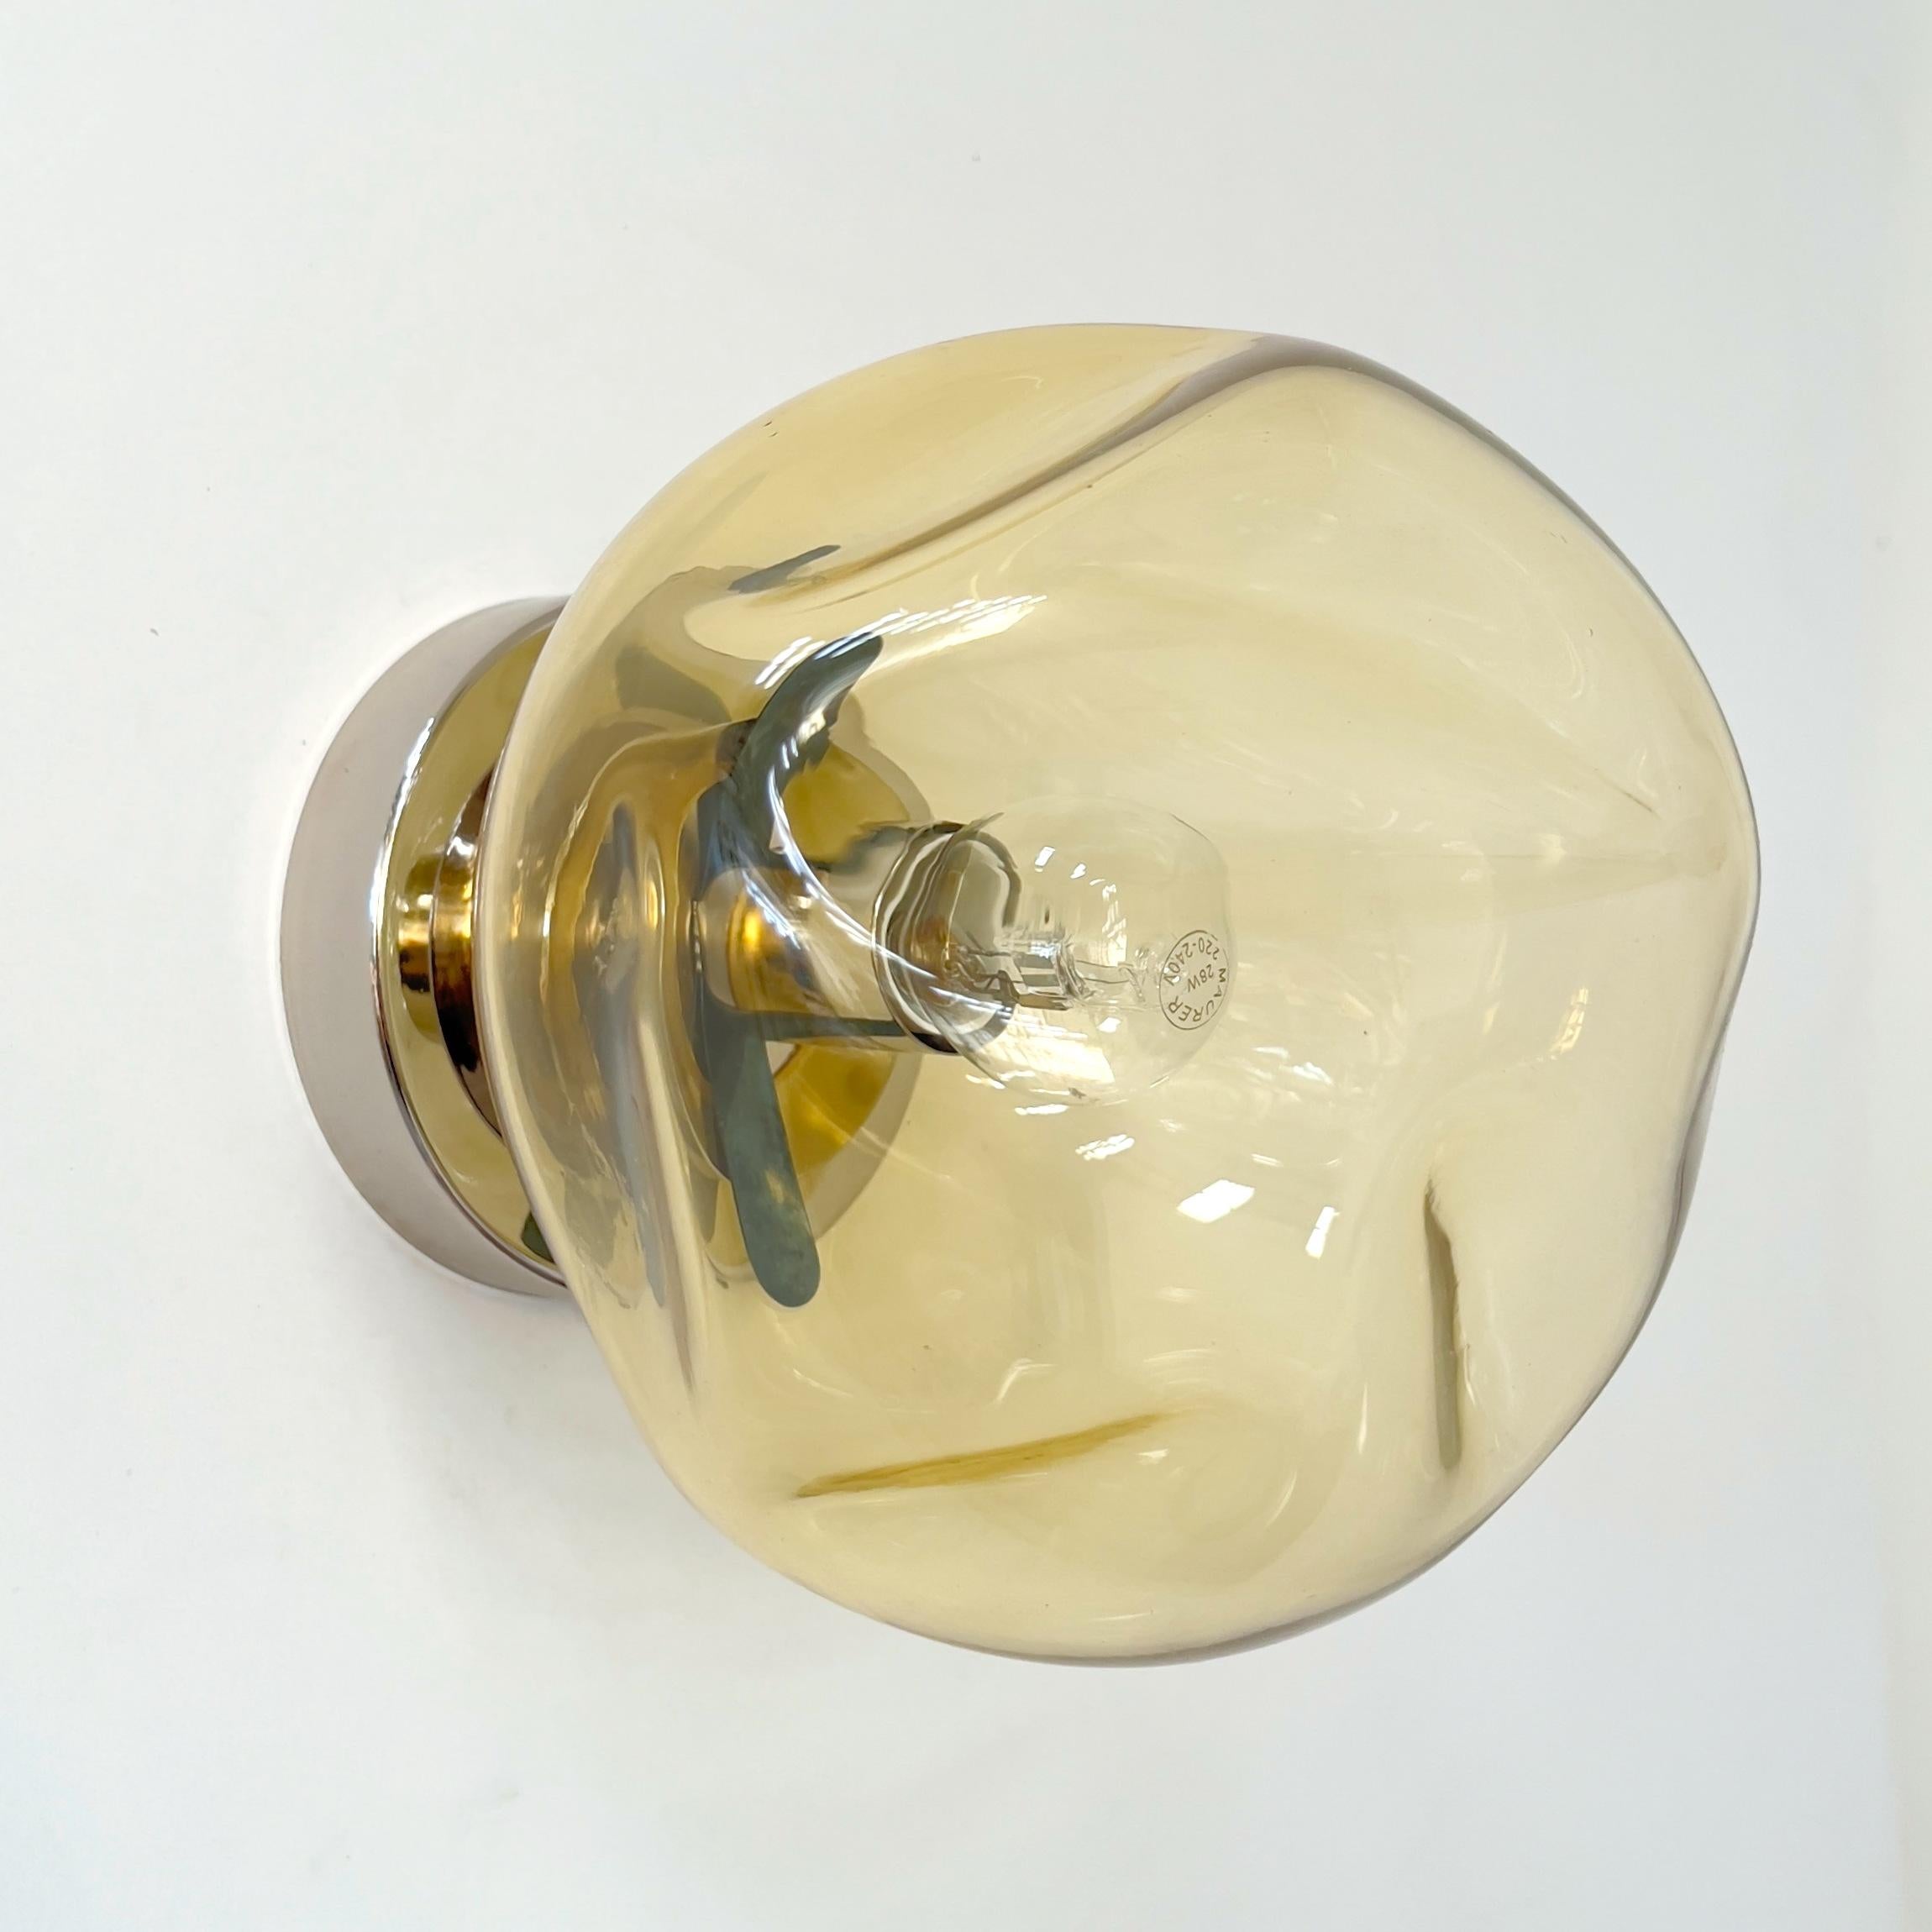 Italian modern wall light or flush mount with a large amber warped Murano glass shade mounted on polished nickel finish metal frame, designed by Fabio Bergomi for Fabio Ltd, made in Italy
1 light / E12 or E14 type / max 40W
Measures: Height 7